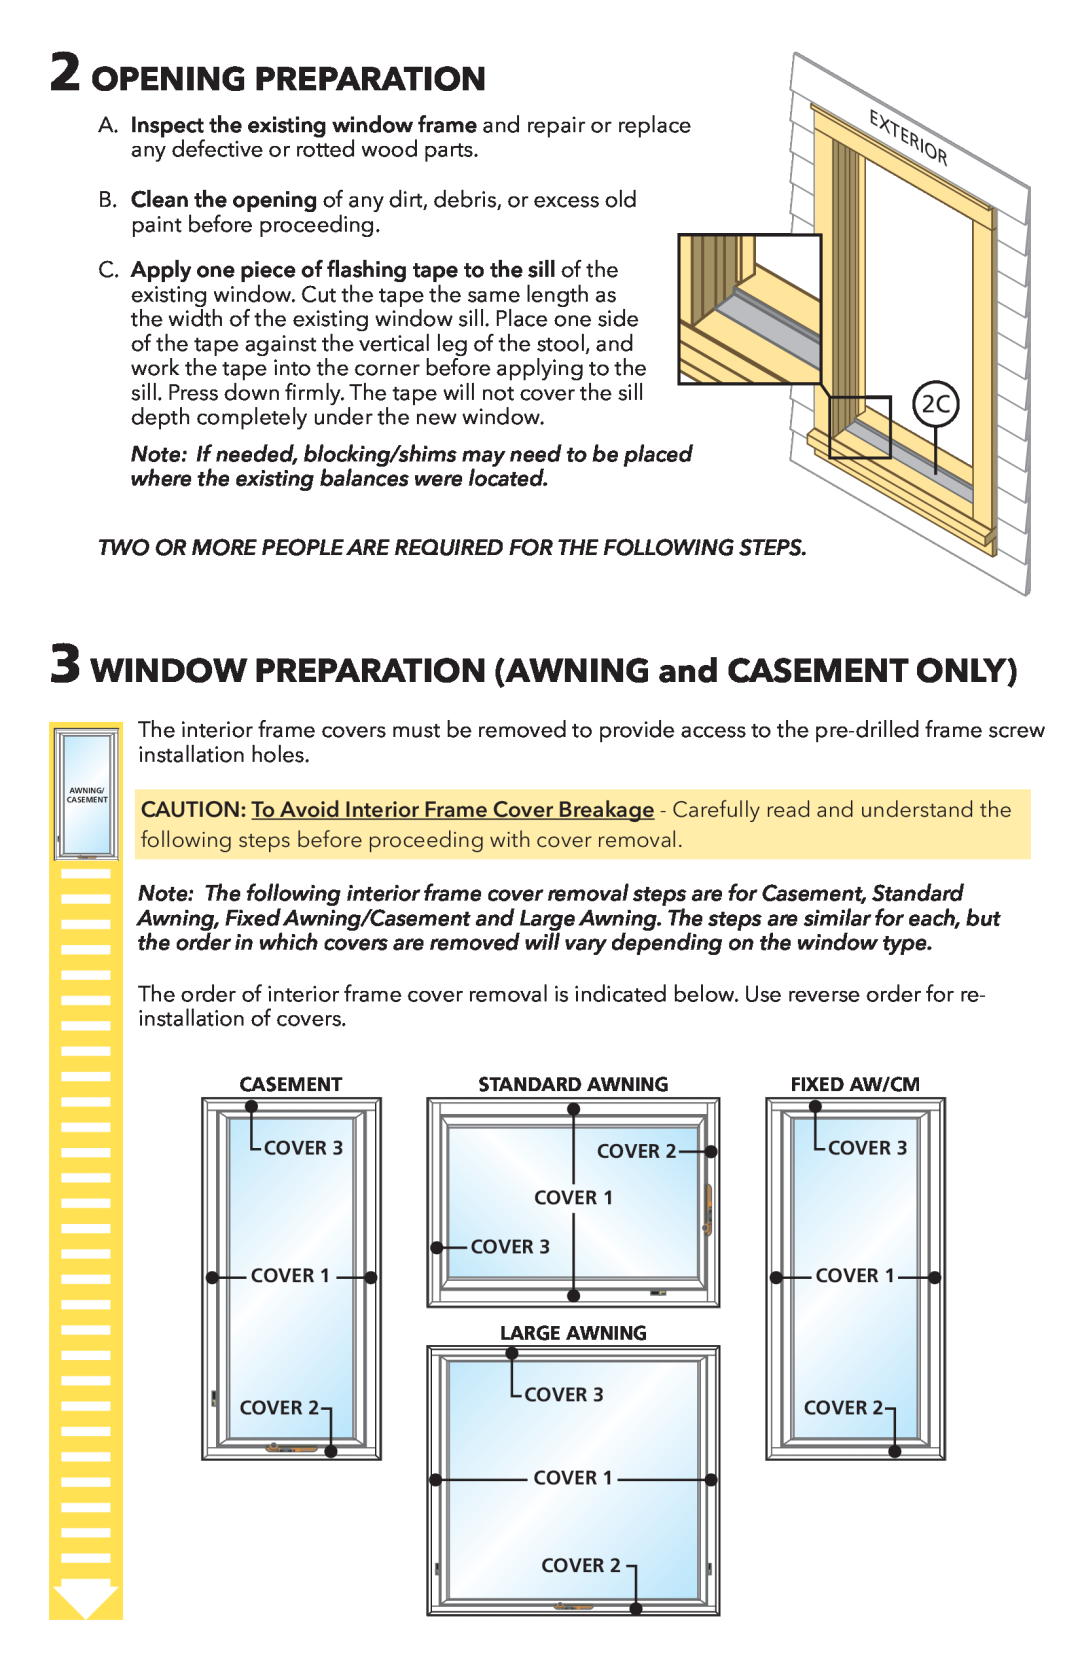 Pella 80YW0102 warranty Opening Preparation, WINDOW PREPARATION AWNING and CASEMENT ONLY 